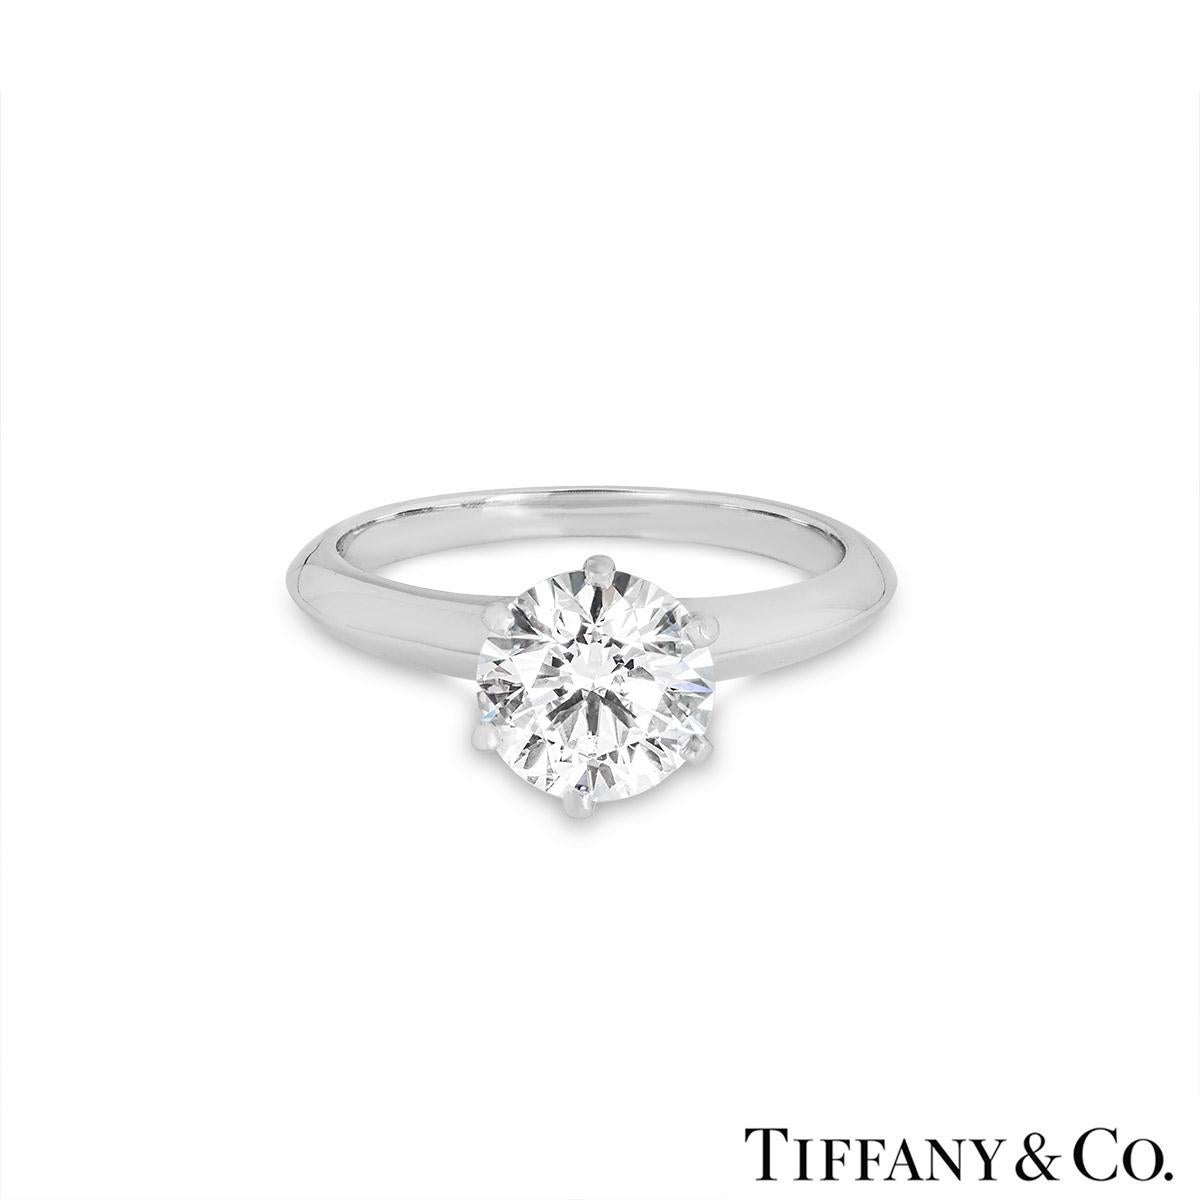 Round Cut Tiffany & Co. Round Diamond Engagement Ring 1.53 Carat For Sale